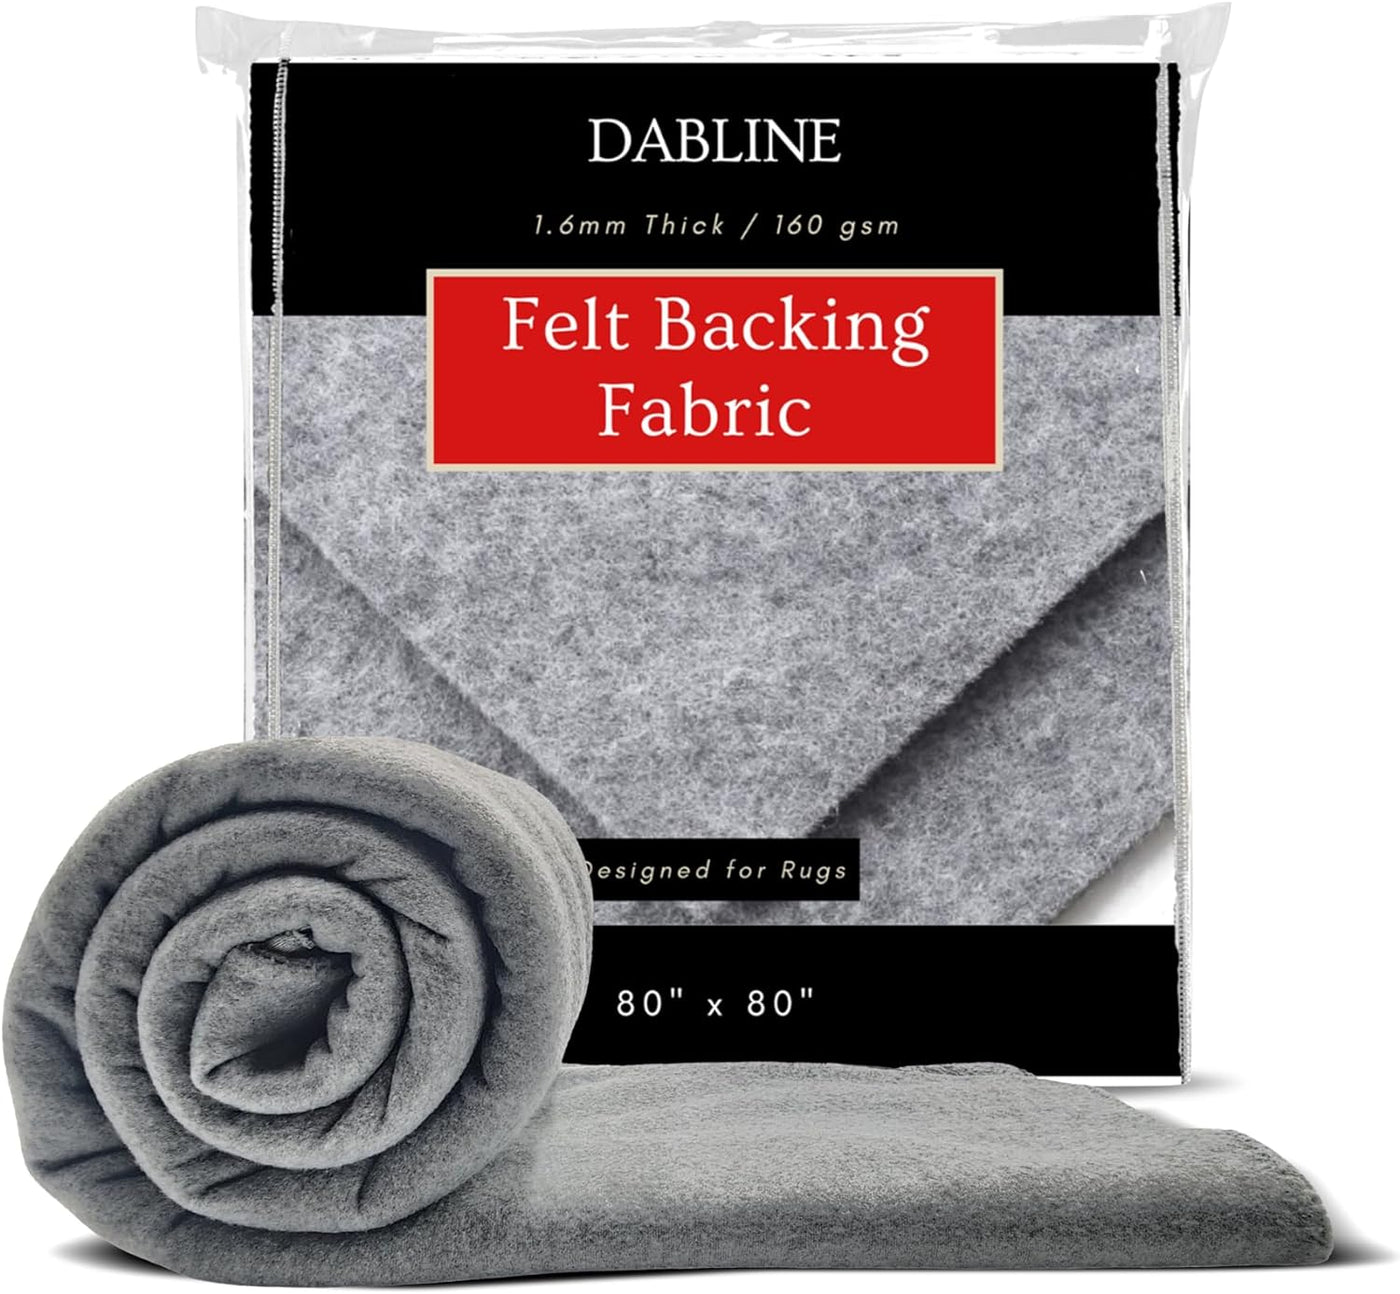 80" x 80" Acrylic Felt Fabric for Tufting and Rug Making - 1.6mm Gray Thick Craft Felt Sheet 6.6x6.6 ft